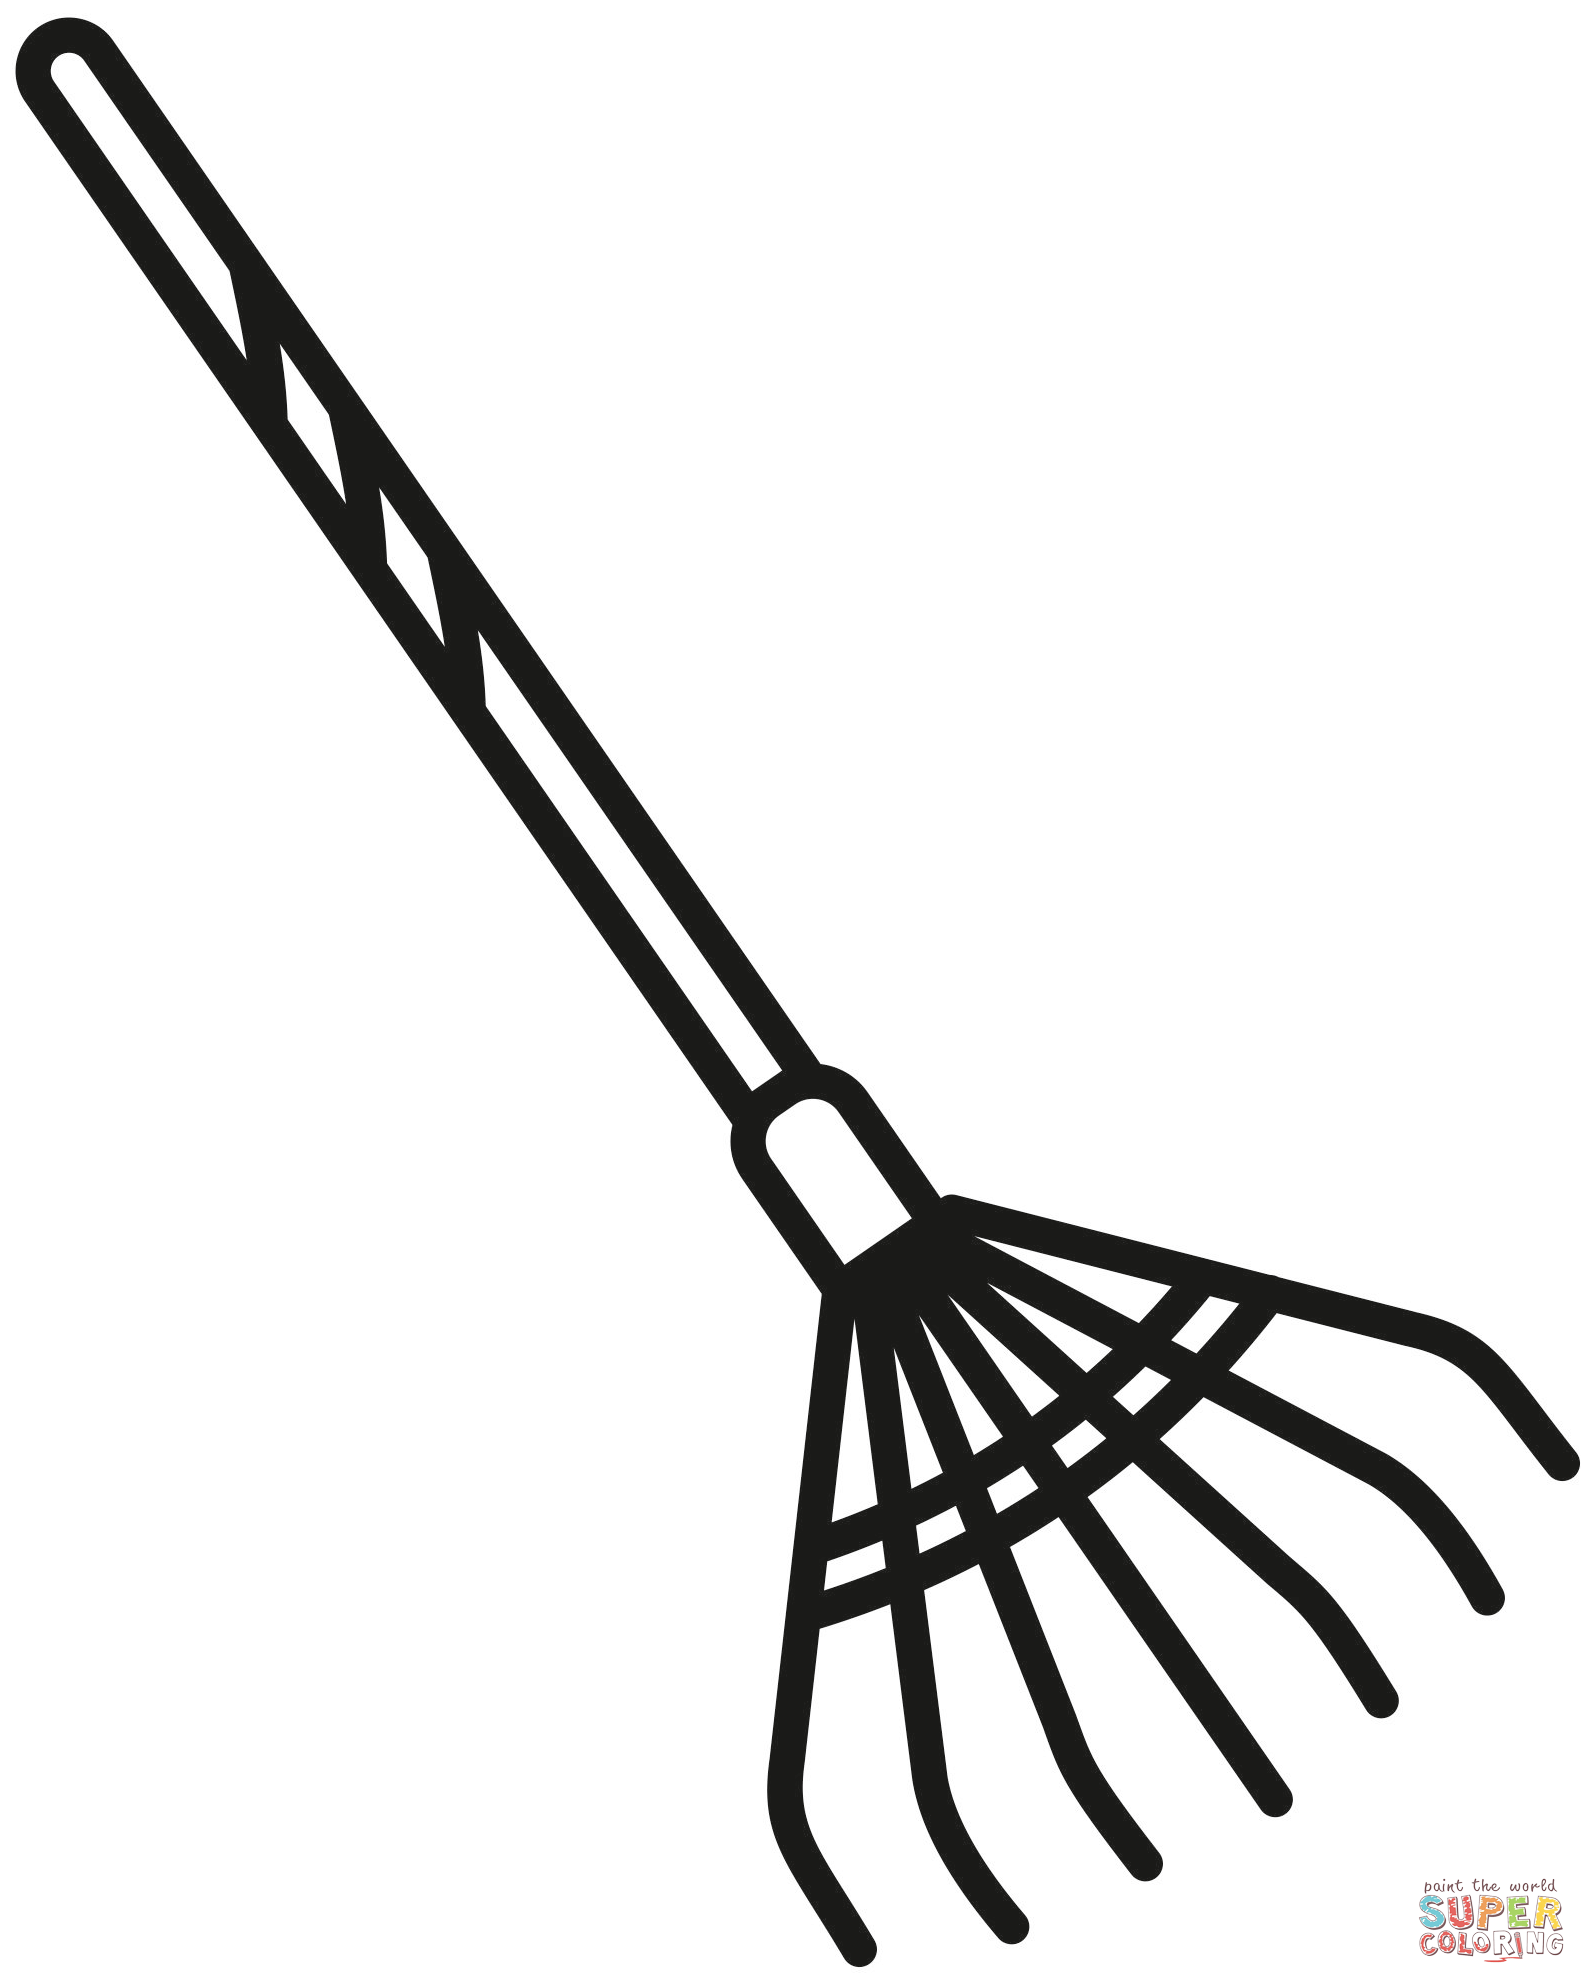 Garden rake coloring page free printable coloring pages